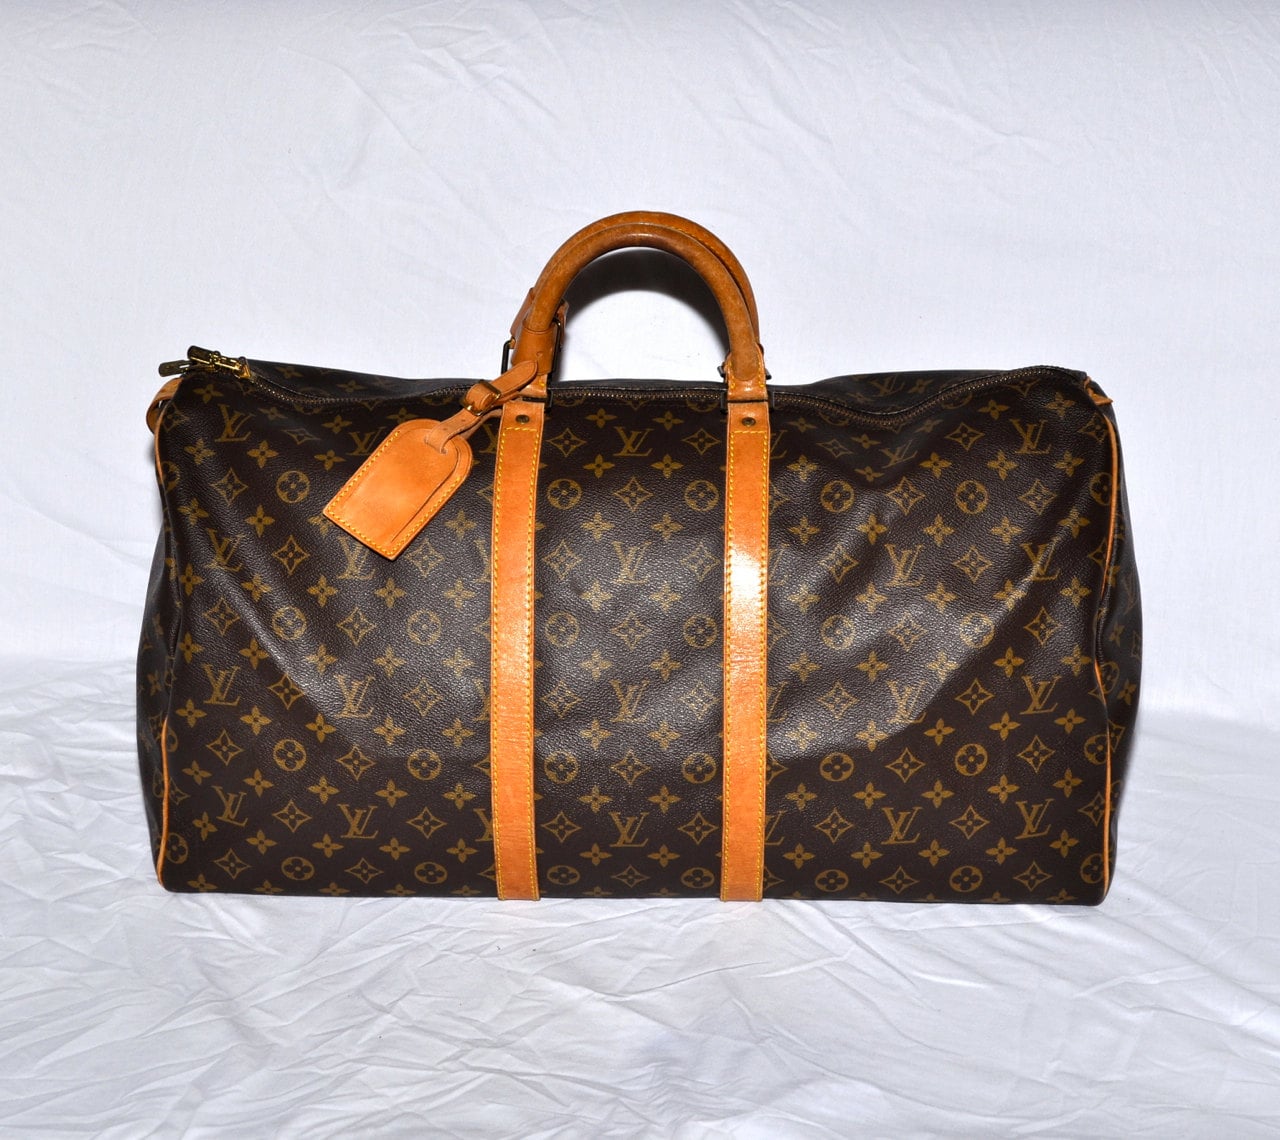 LOUIS VUITTON Keepall 55 Duffel Bag Large Size LV by louise49